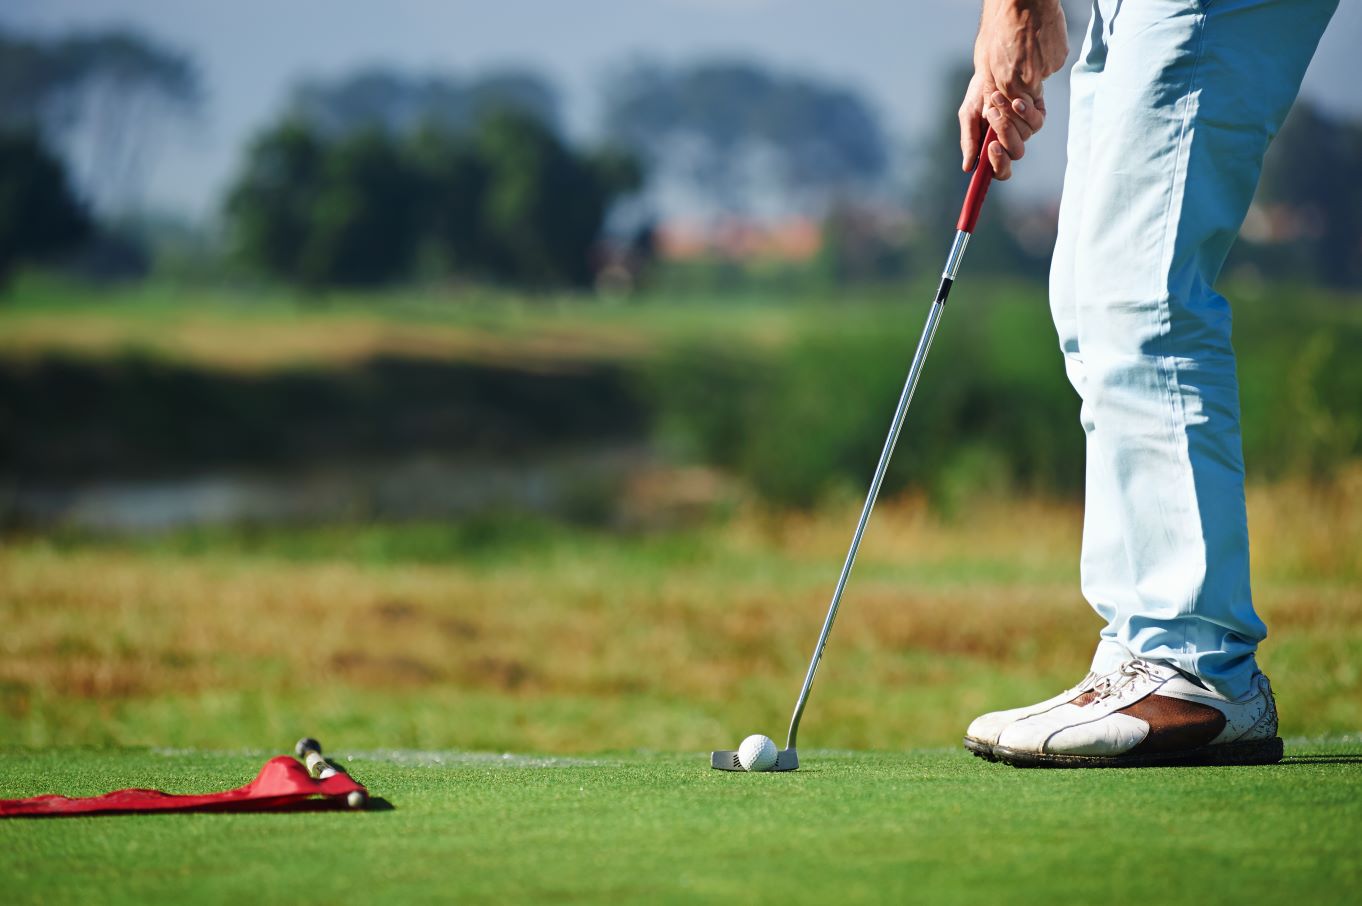 A golfer putts for a birdie during a round of golf.